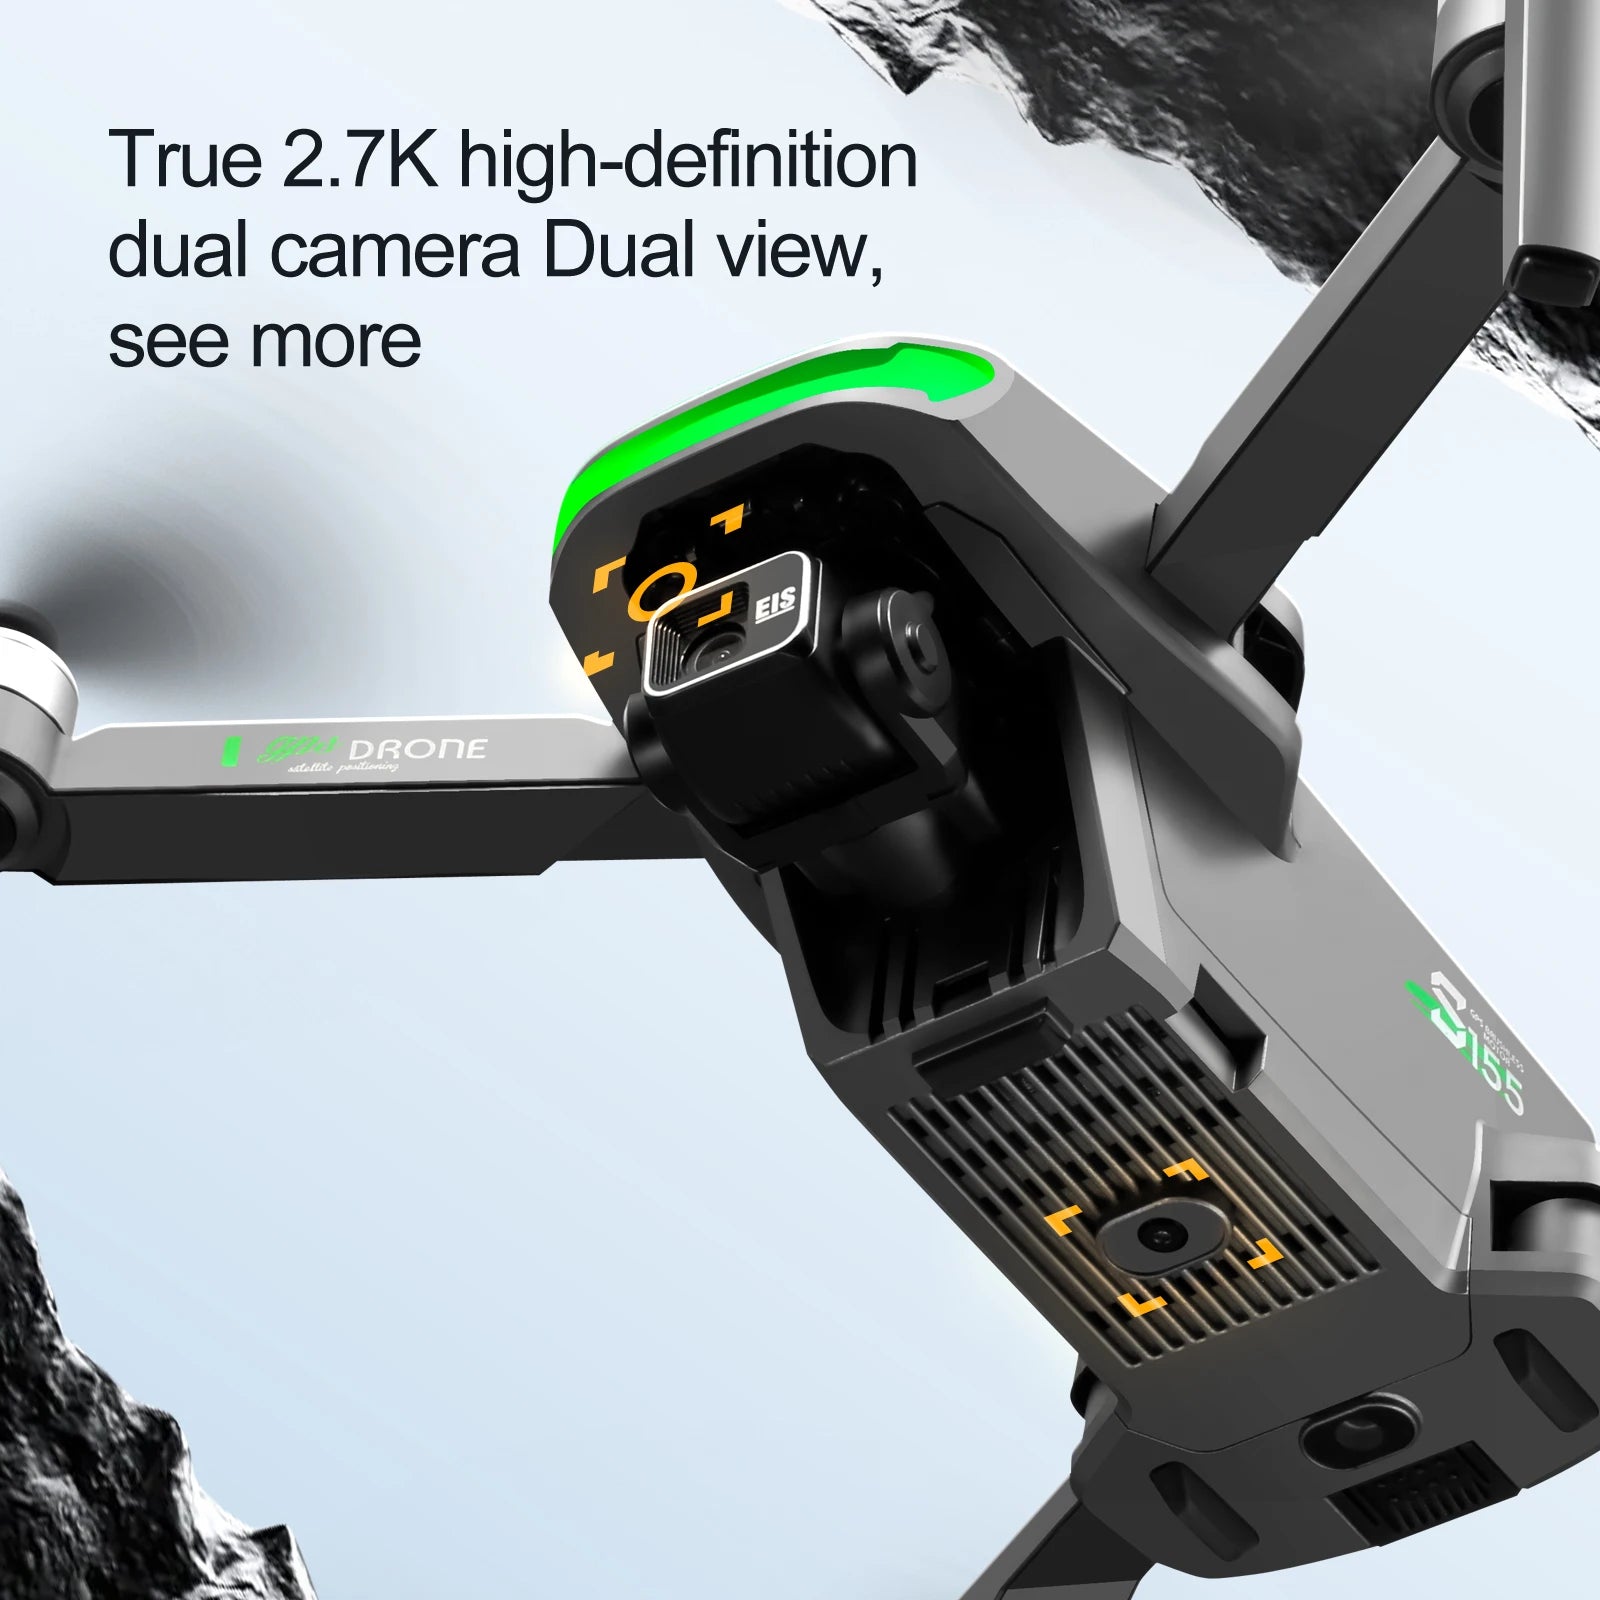 S155 Drone, this construction ensures durability while keeping the drone lightweight